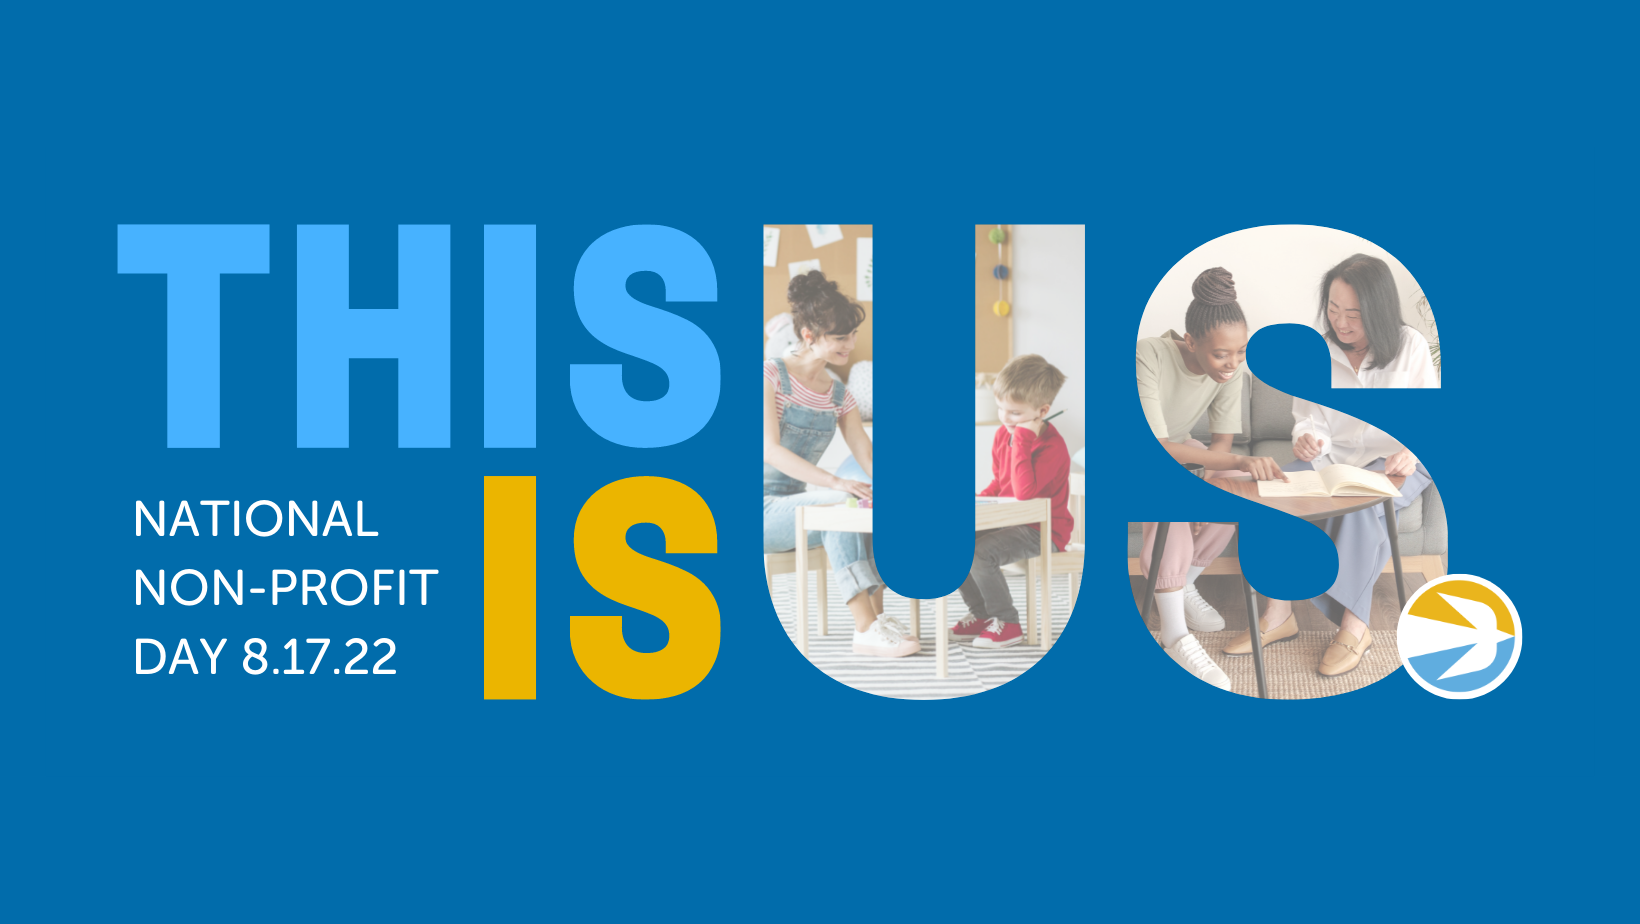 A blue background graphic with the large text "THIS IS US." The "US" portion contains images of diverse people engaging in activities like reading. The text "National Non-Profit Day 8.17.22" is to the left of "US," with a small logo at the bottom right.